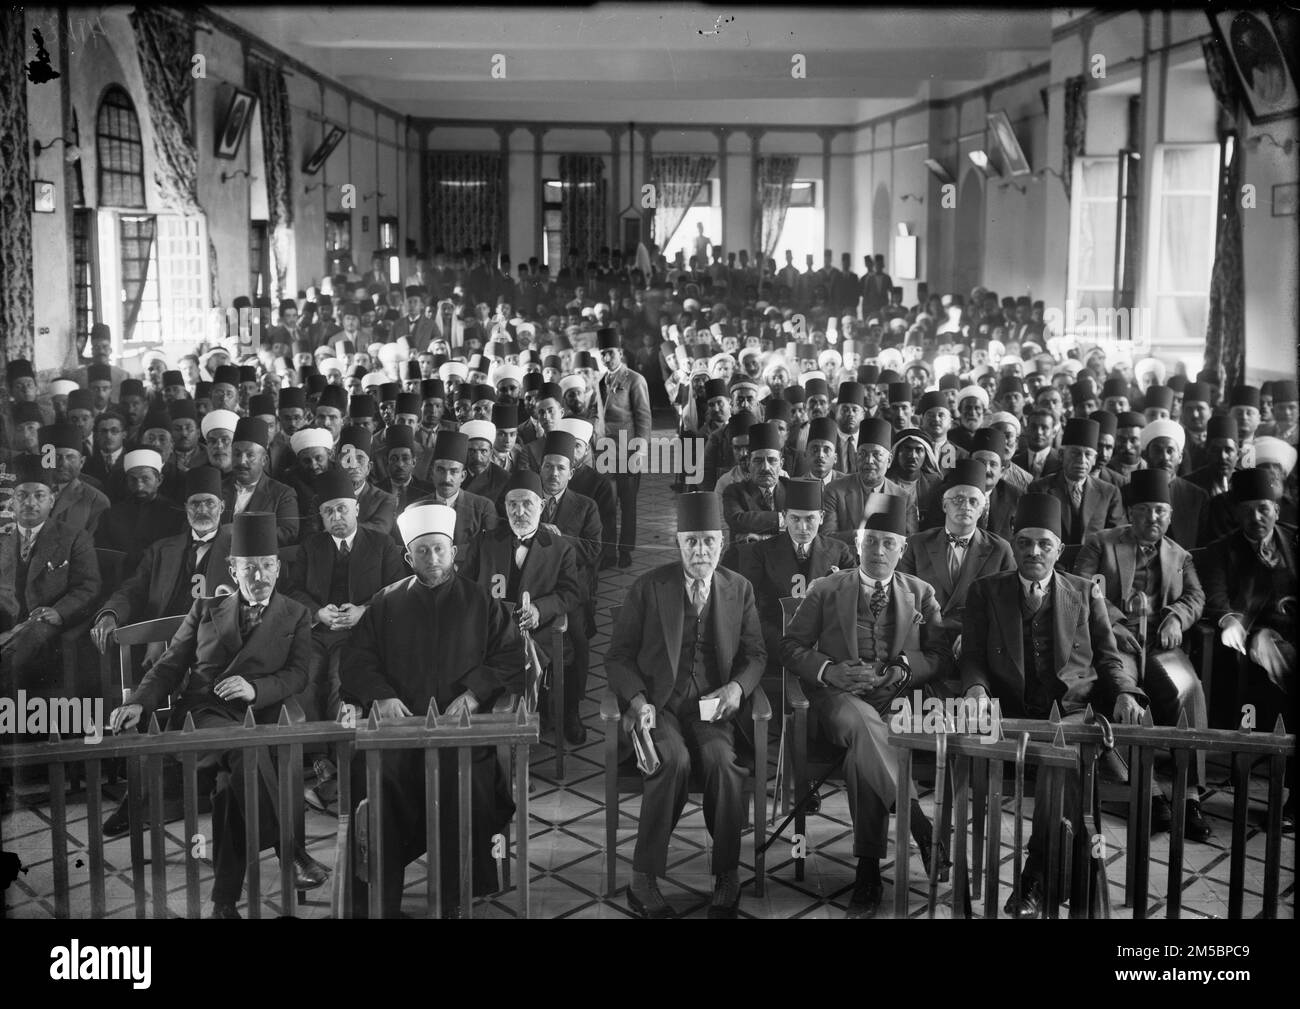 An Arab 'protest gathering' in session during the British Mandate in Palestine, in the Rawdat el Maaref hall, 1929. From left to right : unknown – Amin al-Husayni – Musa al-Husayni – Raghib al-Nashashibi – unknown Stock Photo